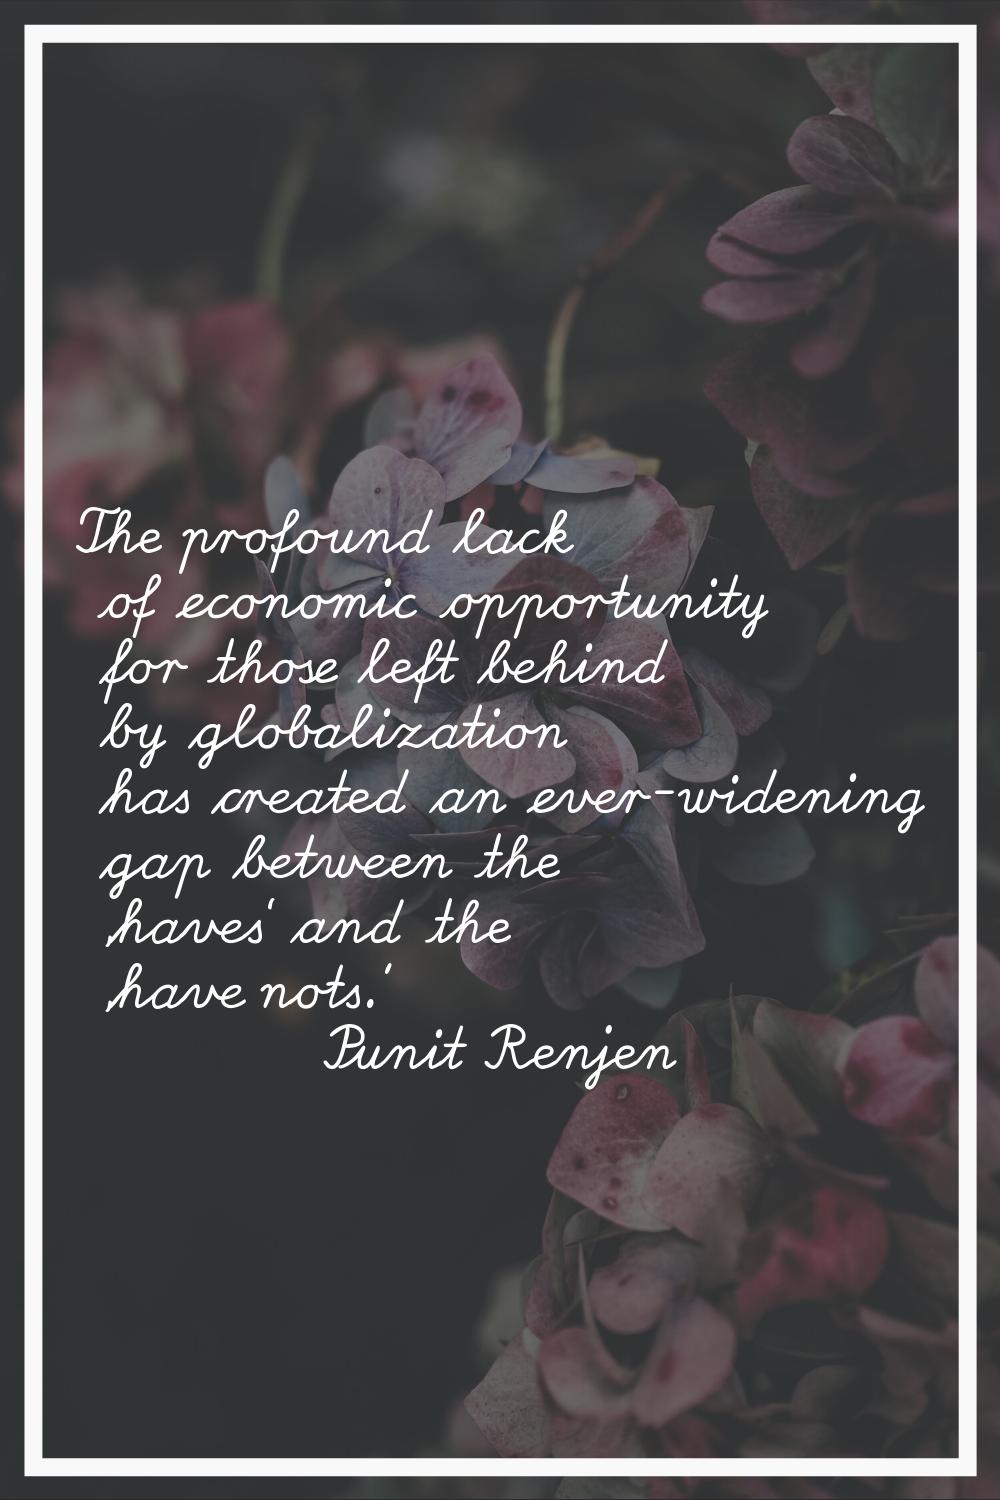 The profound lack of economic opportunity for those left behind by globalization has created an eve